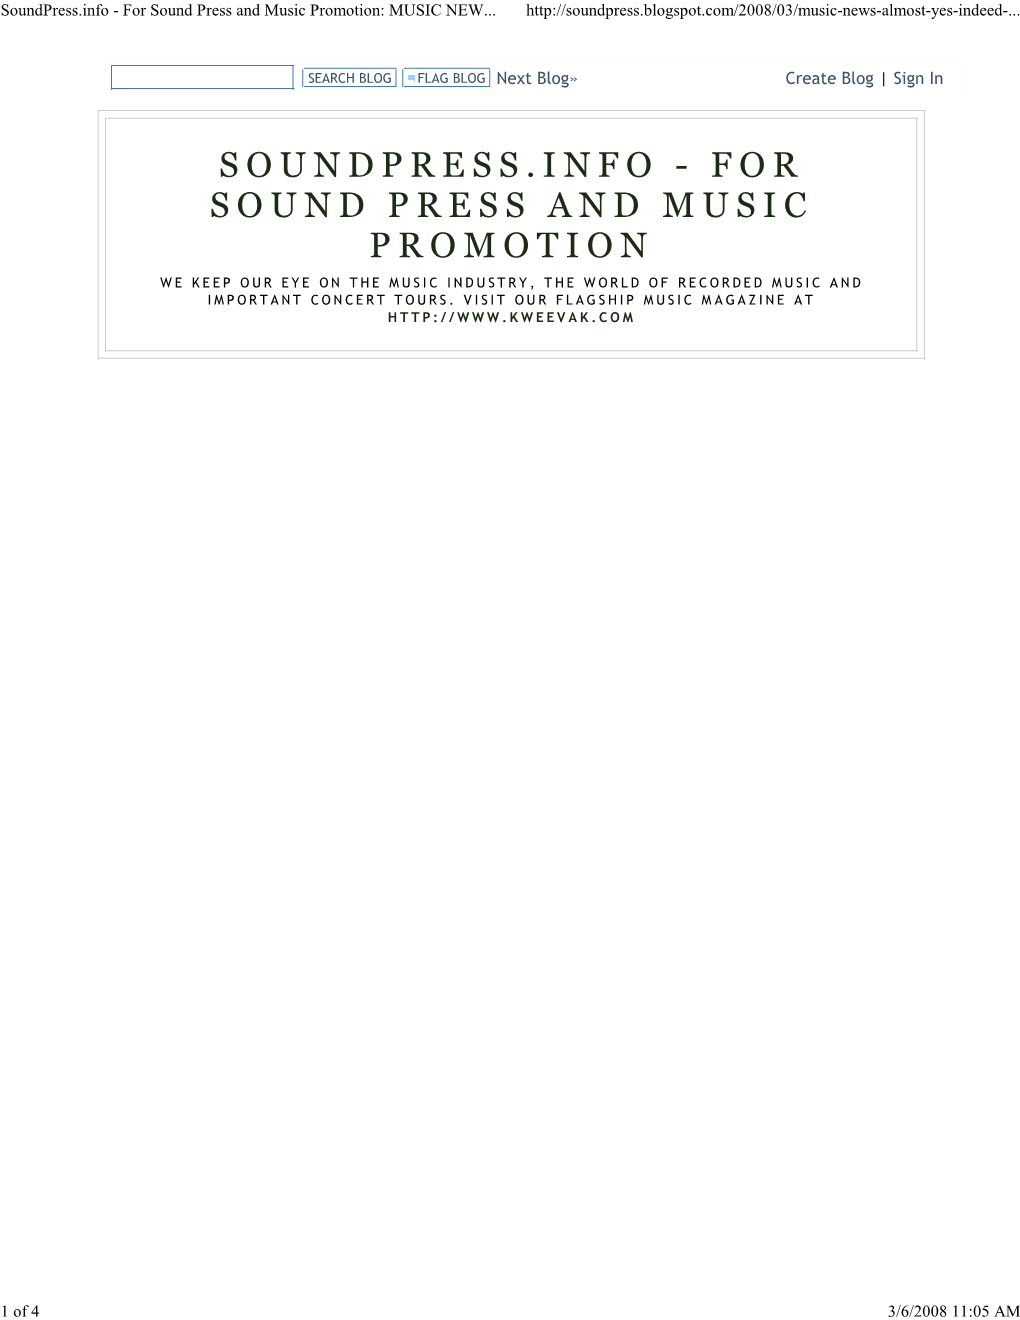 Soundpress.Info - for Sound Press and Music Promotion: MUSIC NEW